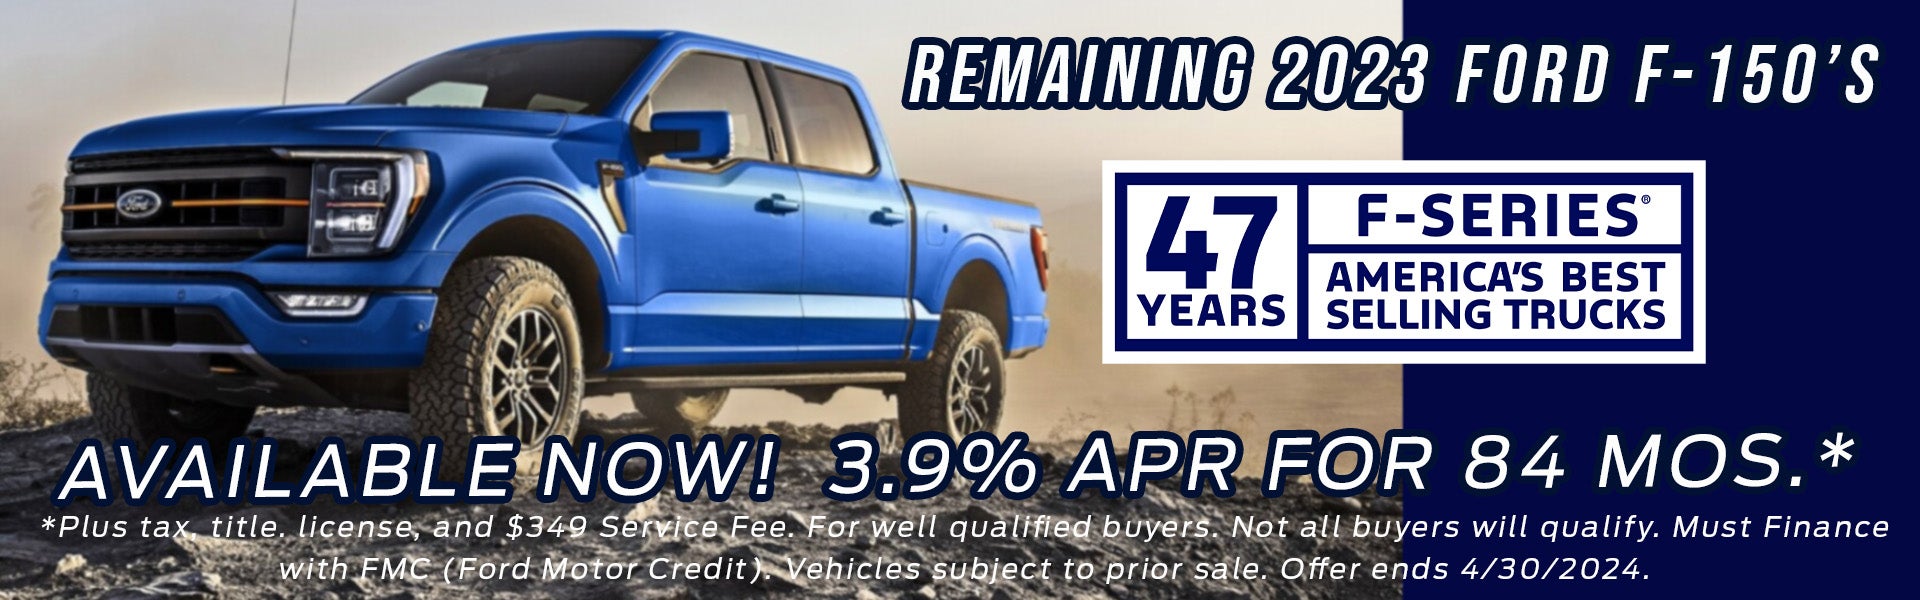 Available 3.9% APR On 2023 Ford F-150!